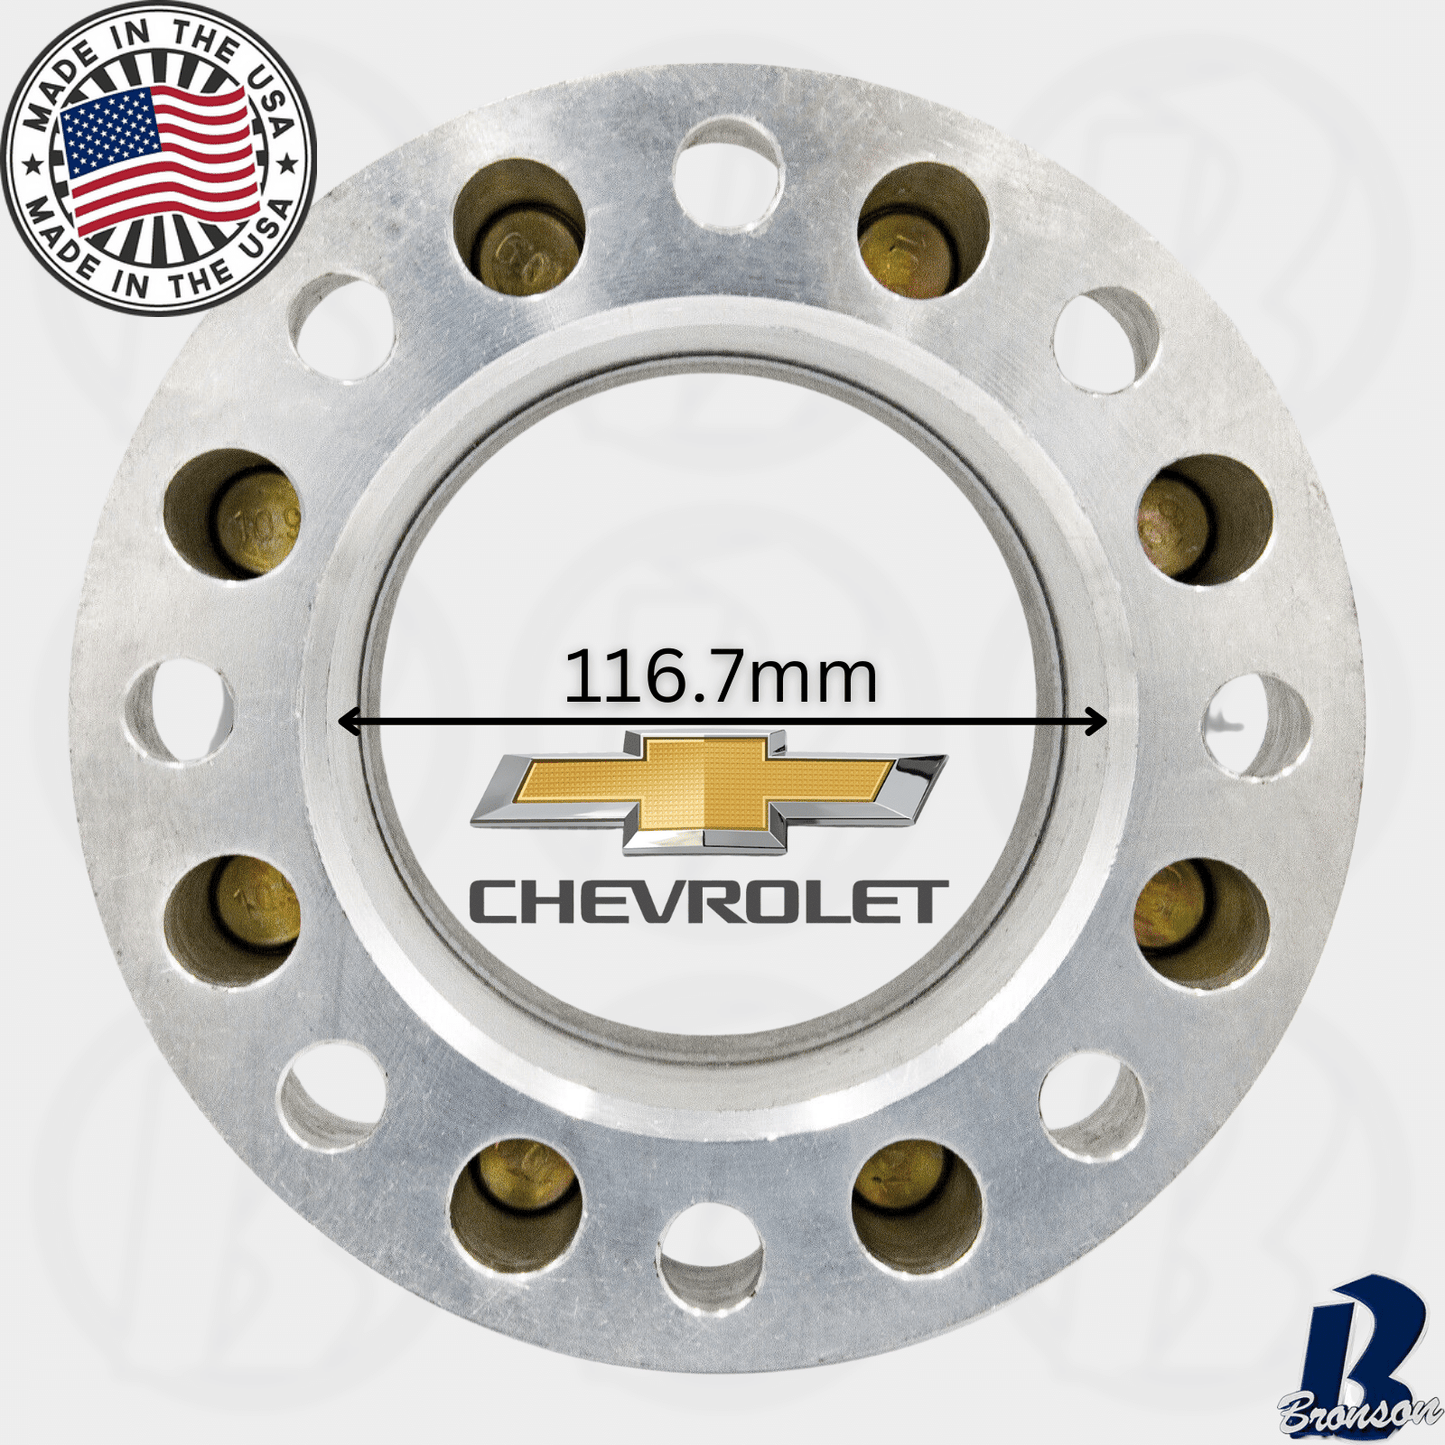 8x6.5" to 8x200 Hub Centric Wheel Spacer/Adapter - Thickness: 1"- 2.5"